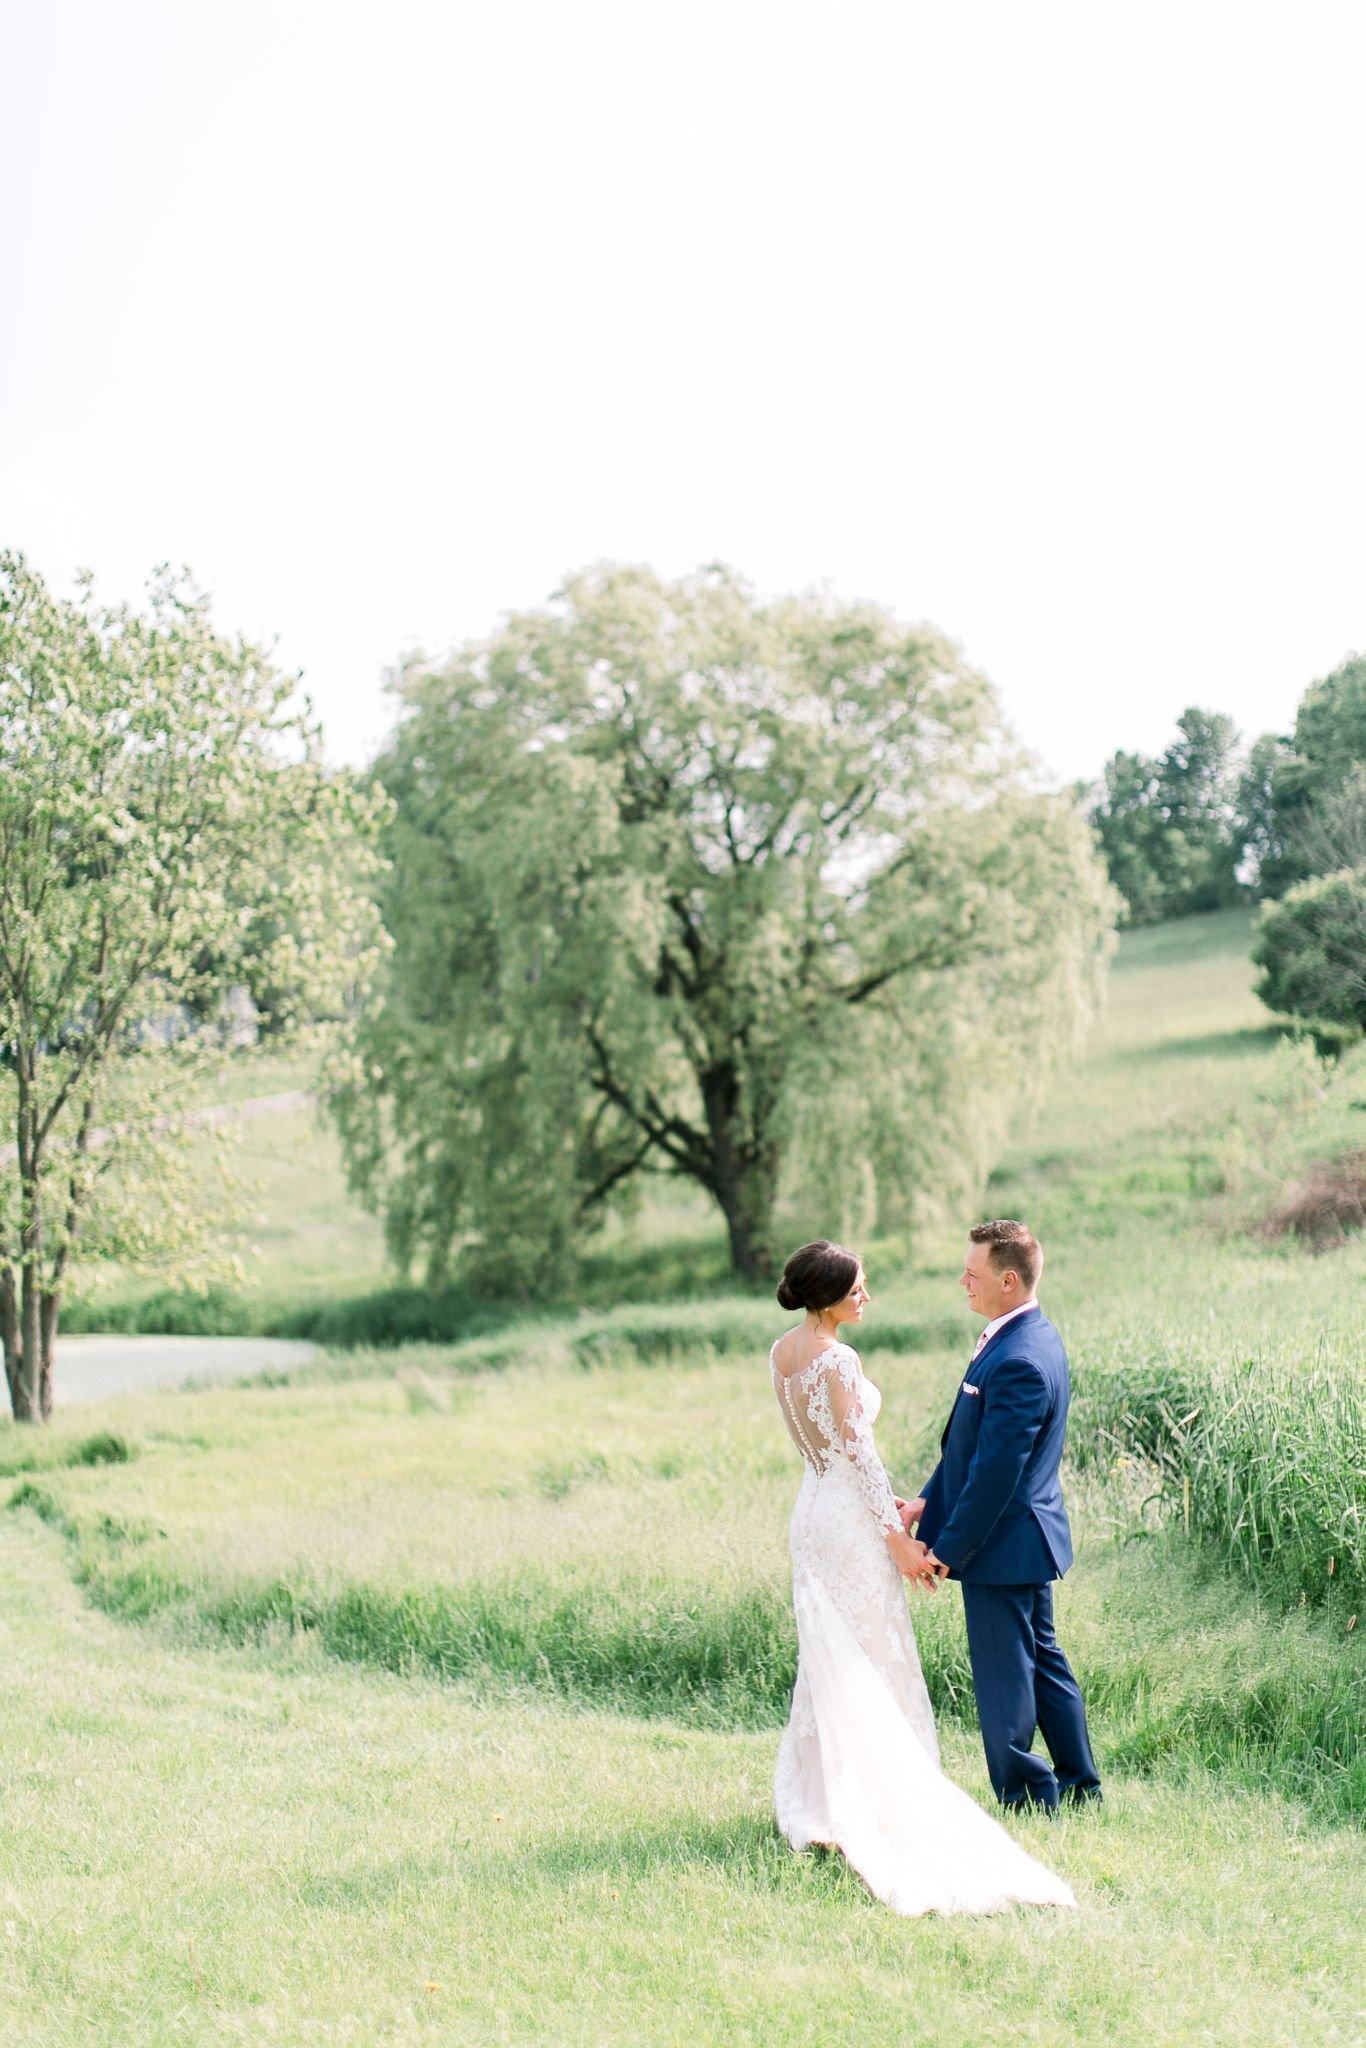 Bride and groom in a field during an outdoor Maine wedding